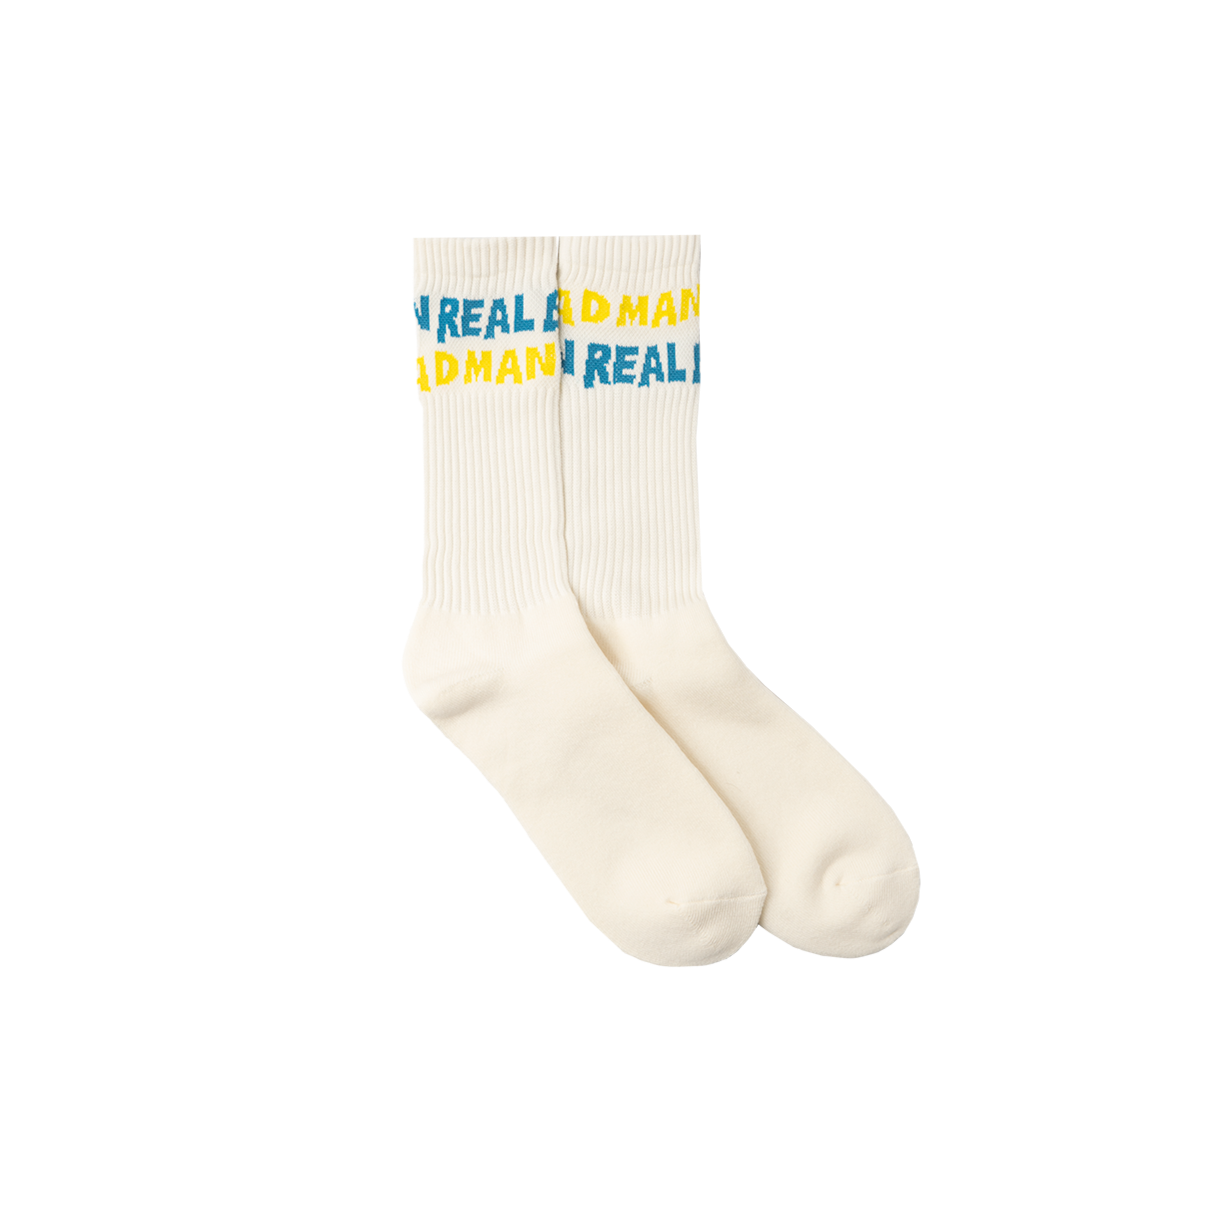 Real Bad Spellout Socks - Yellow / Blue